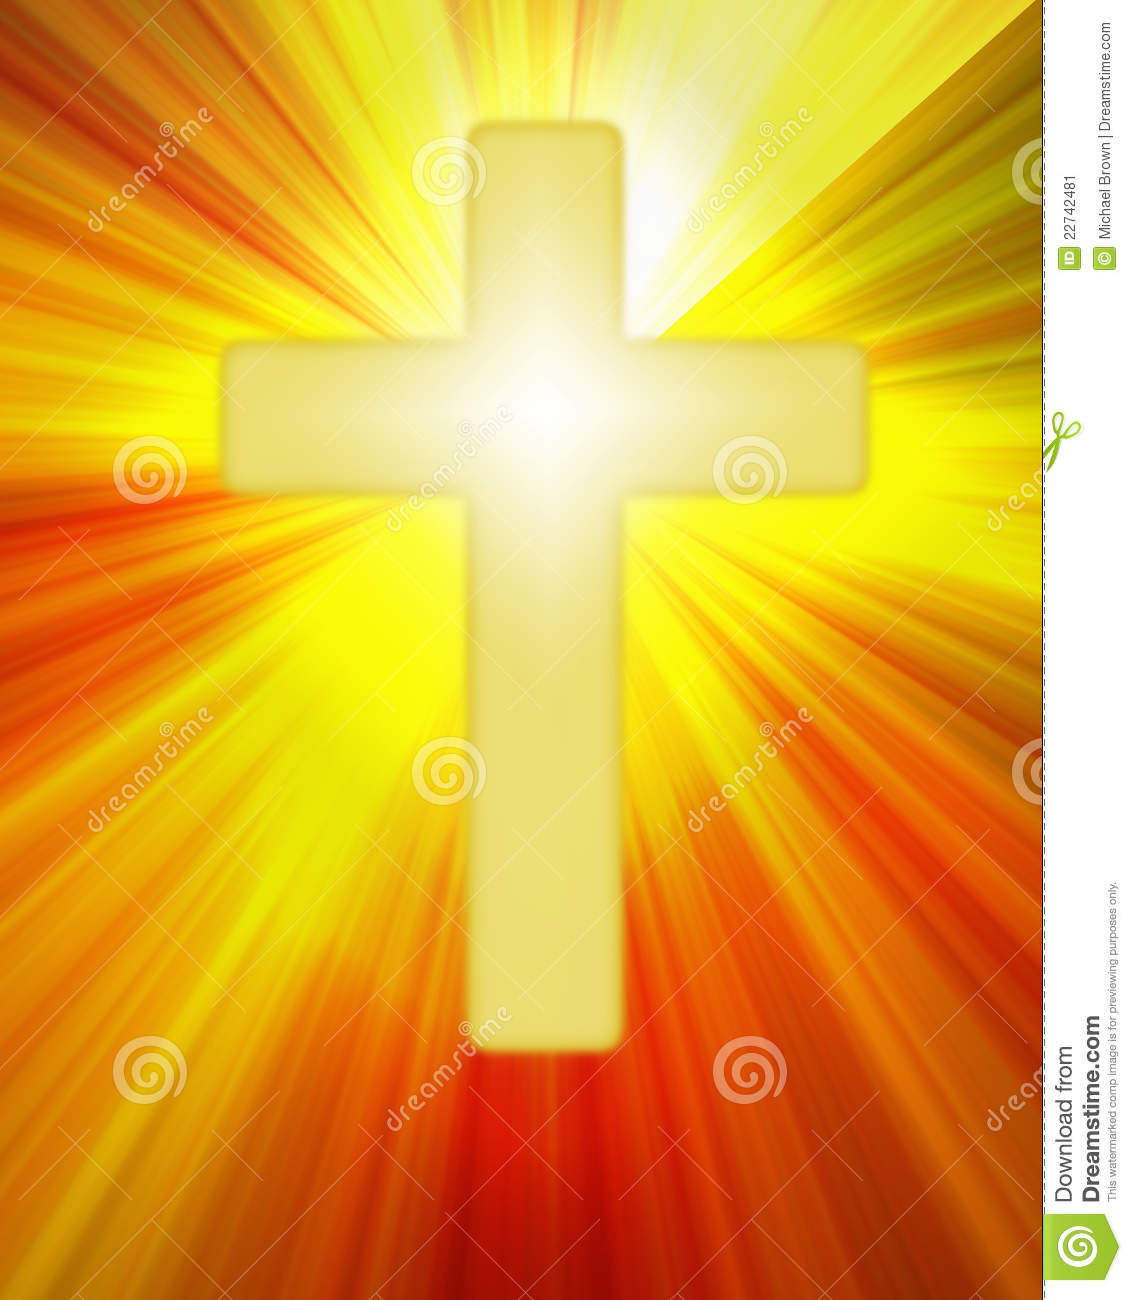 Golden Radiant Cross Symbol Shining On A Background Of Bright Rays